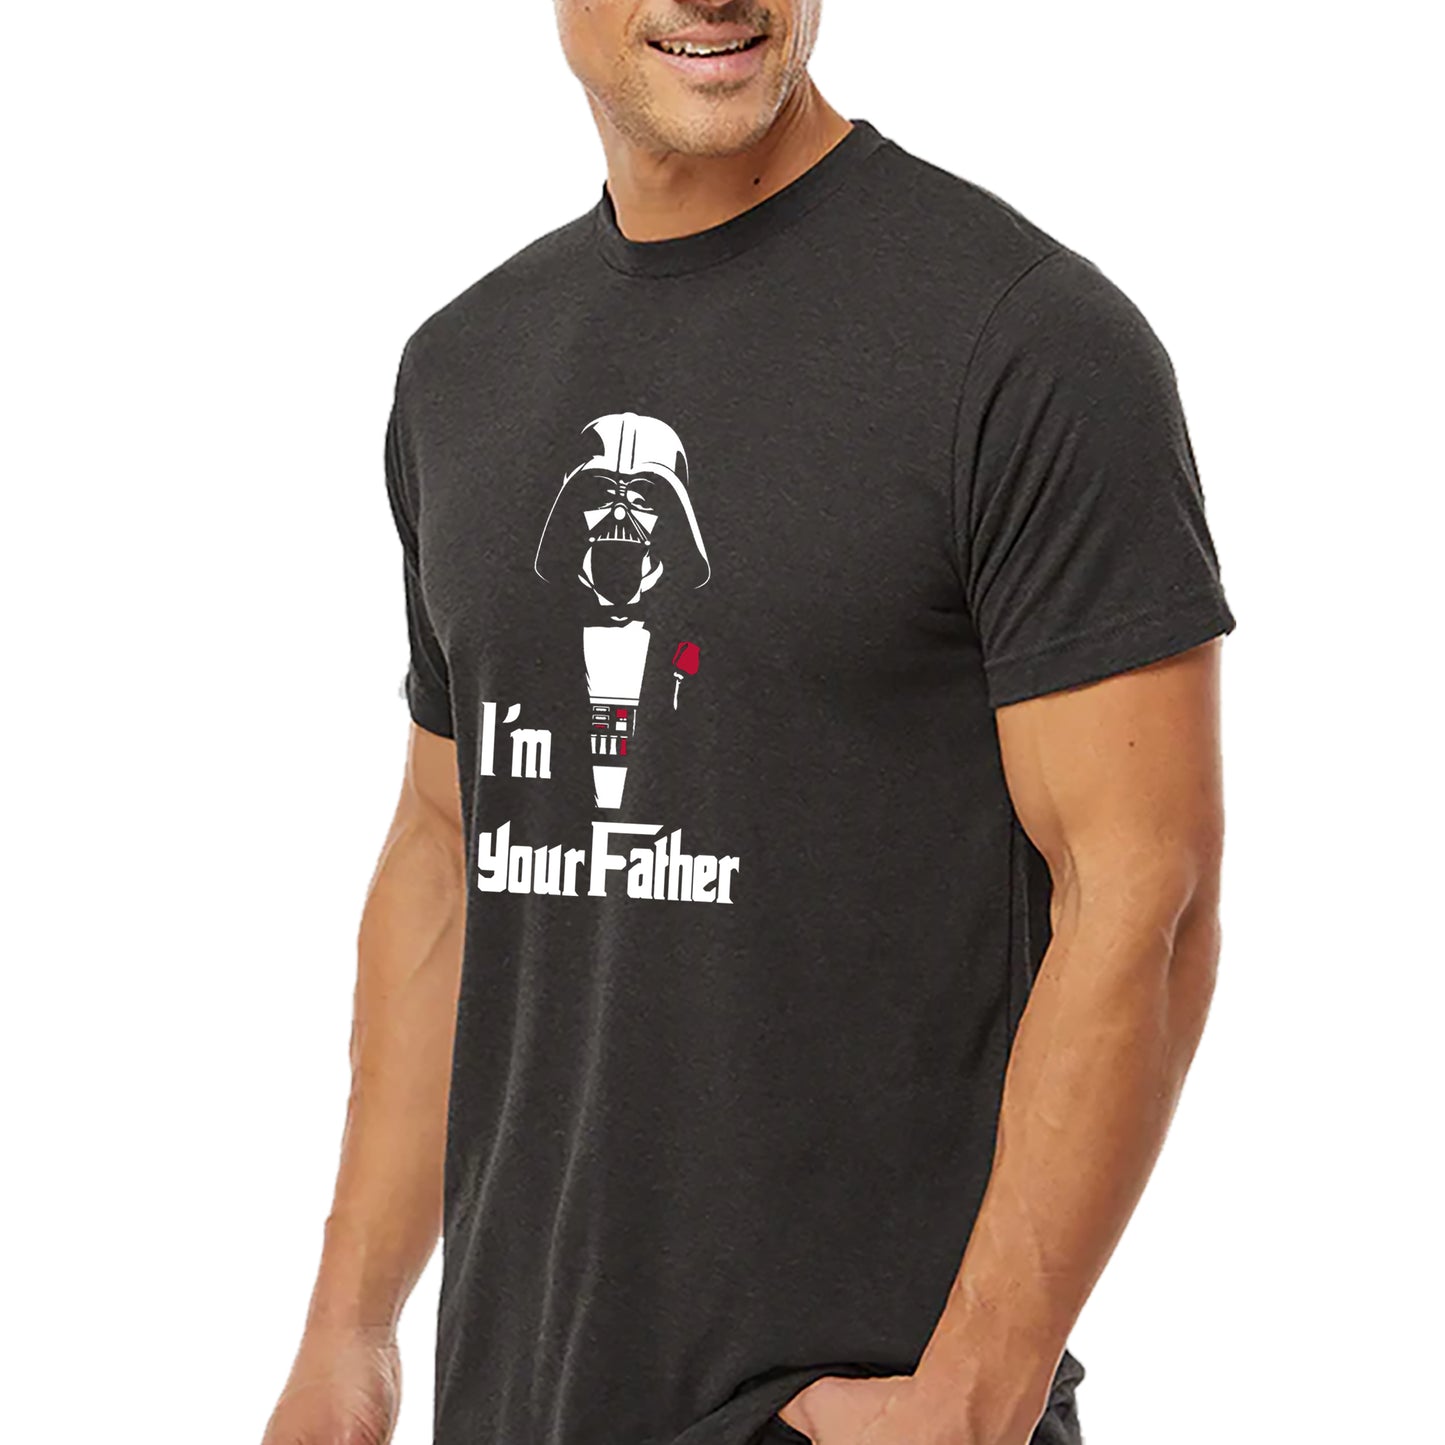 I'm Your Father T-shirt